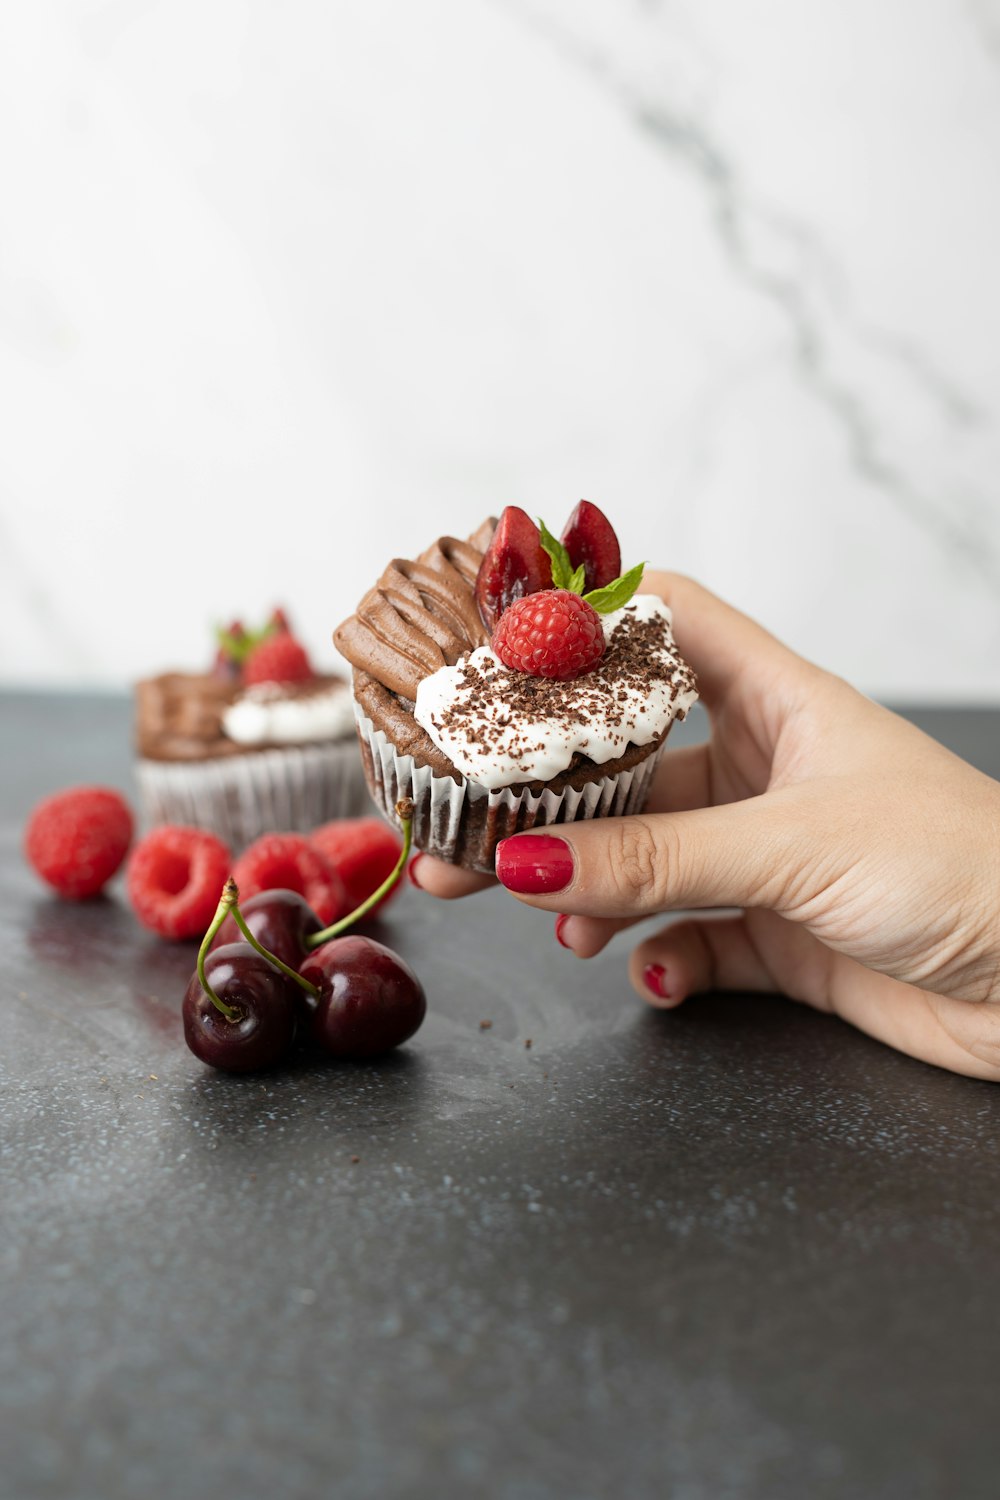 a hand holding a cupcake with chocolate frosting and strawberries